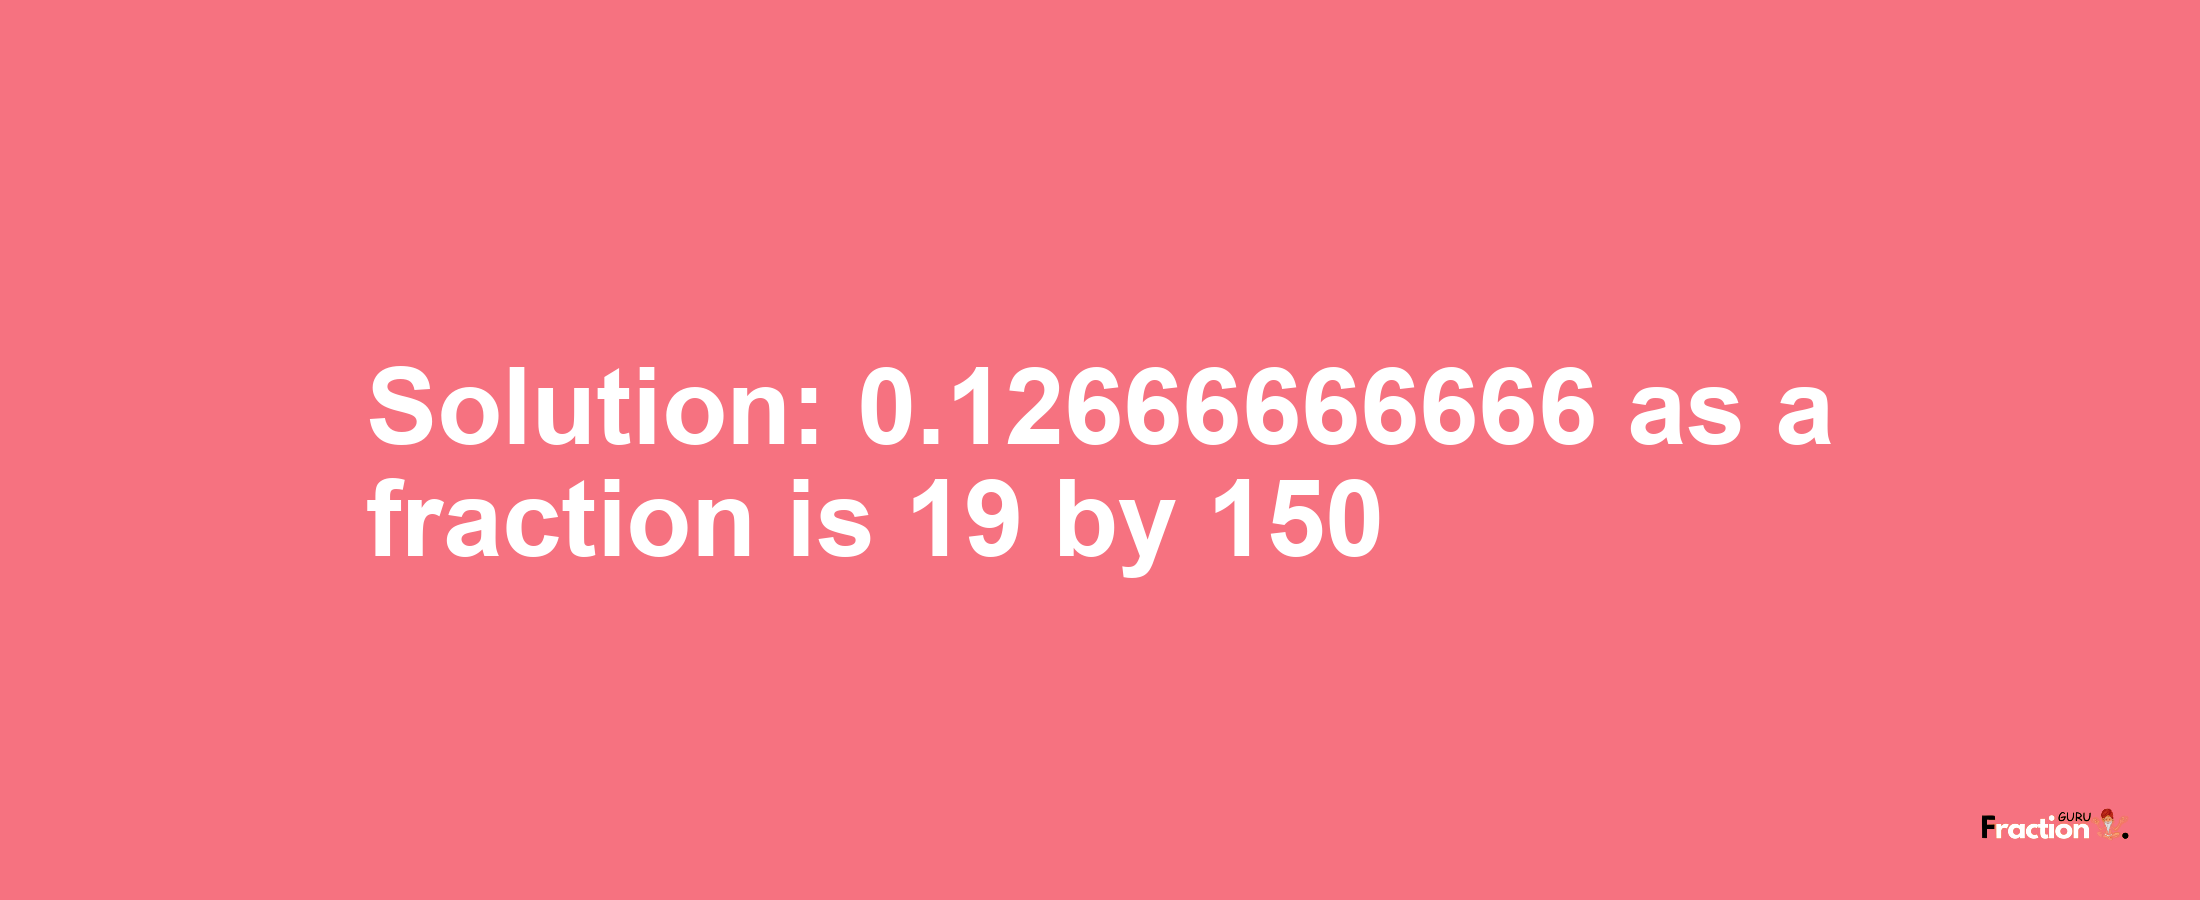 Solution:0.12666666666 as a fraction is 19/150